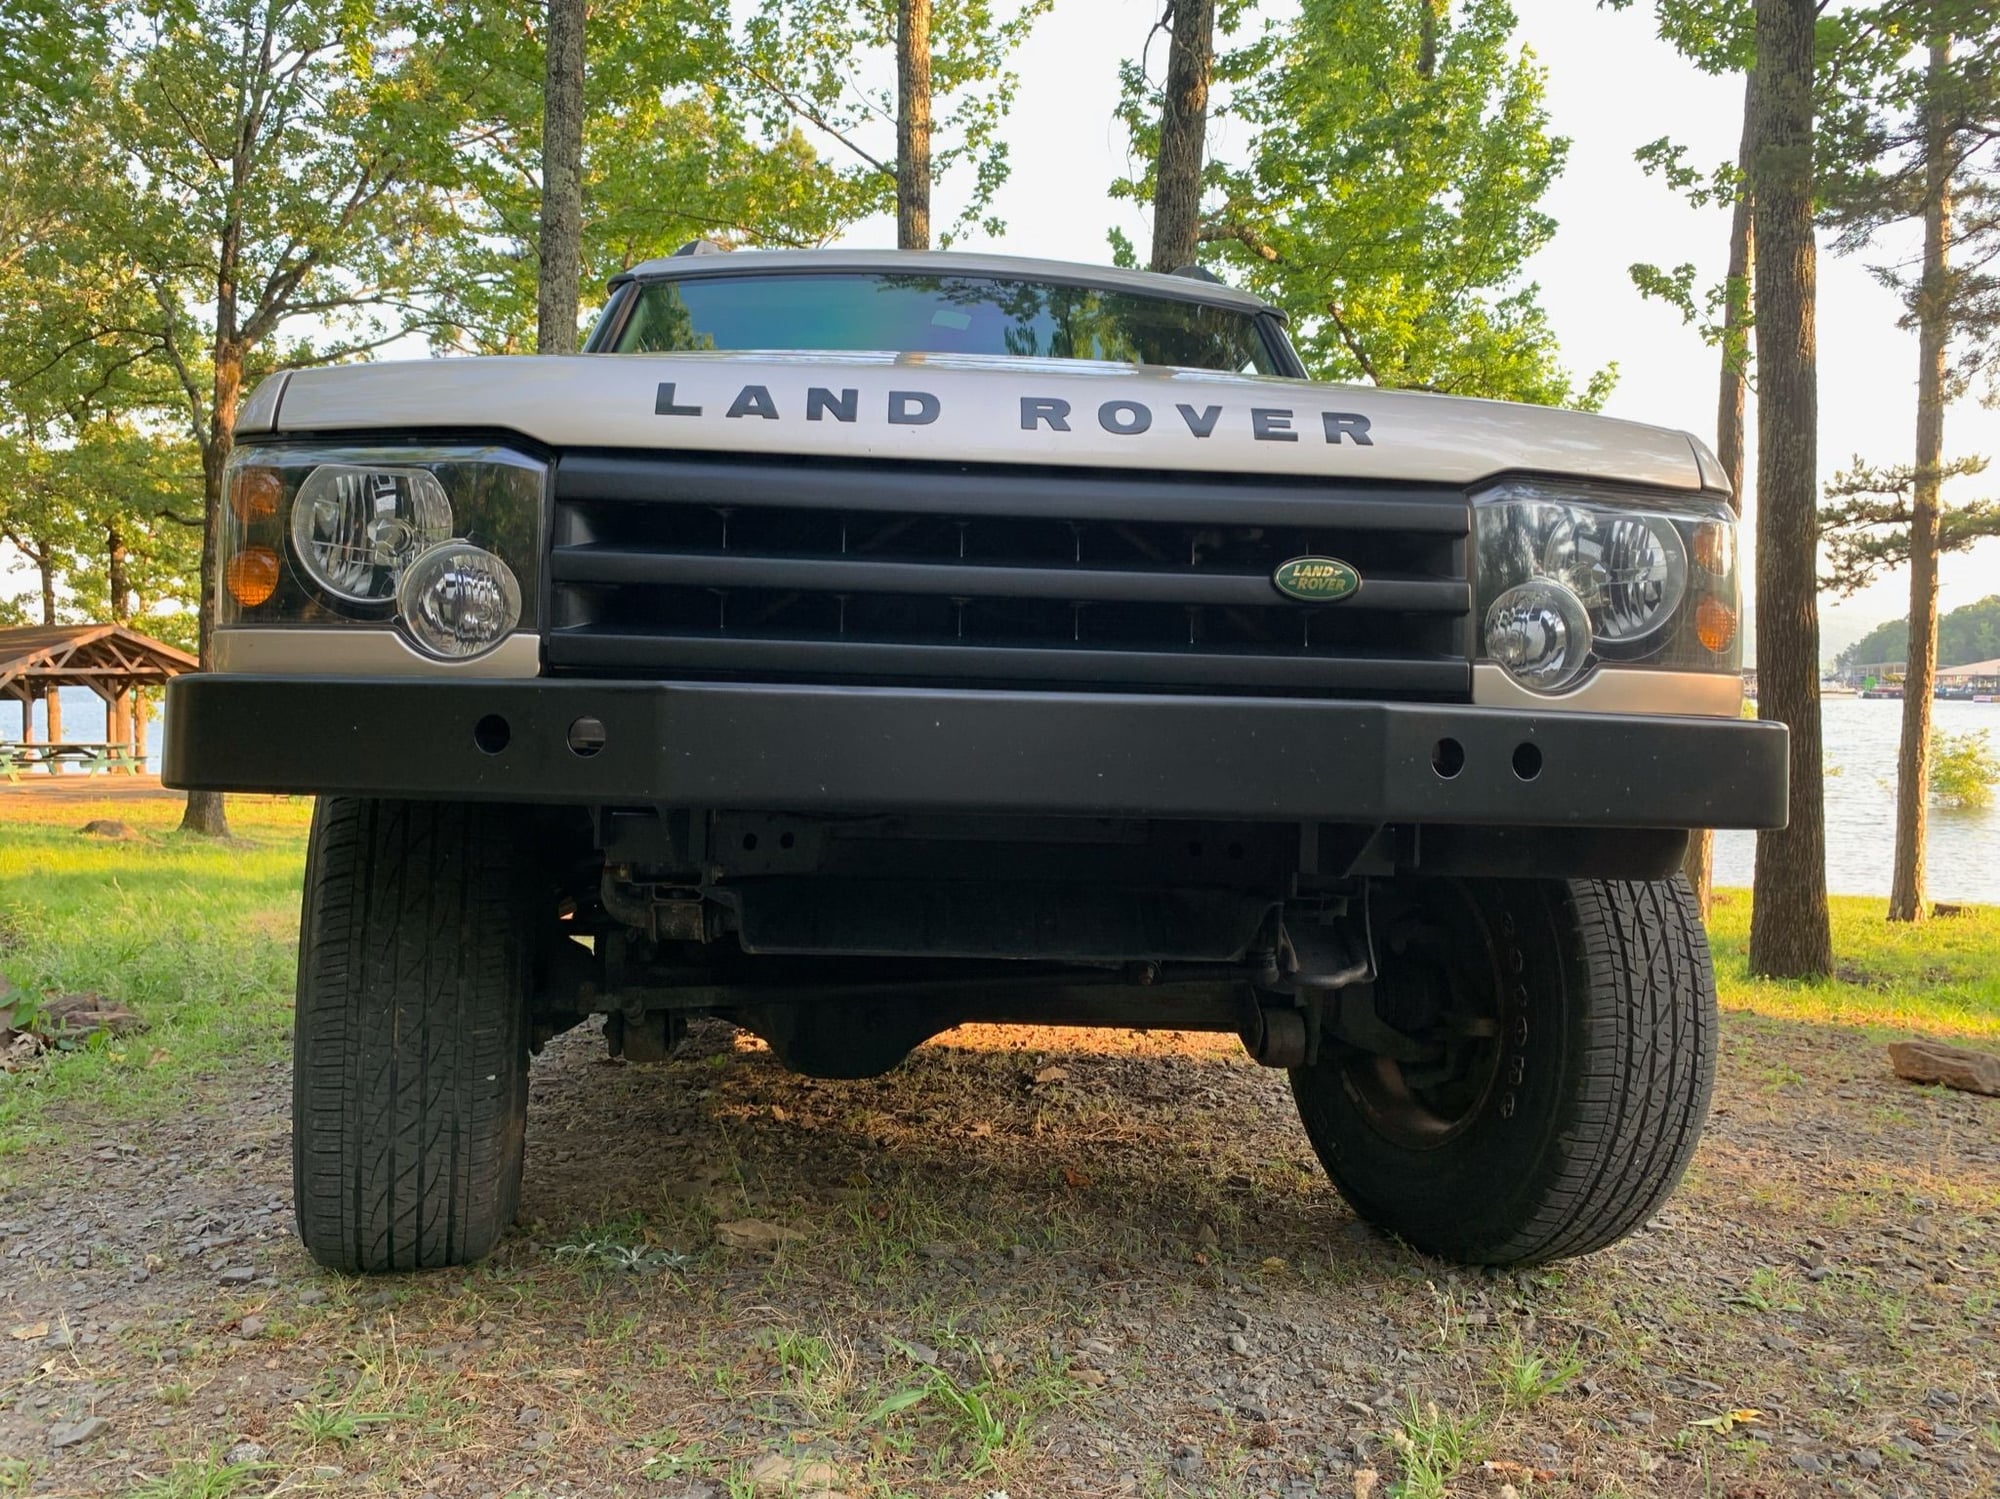 2004 Land Rover Discovery - 2003 Land Rover Discovery 2 "S" Trim  ( NO SUNROOFS ) - Used - VIN SALTL164X3A824938 - 8 cyl - 4WD - Automatic - SUV - Beige - Fairfield Bay, AR 72088, United States